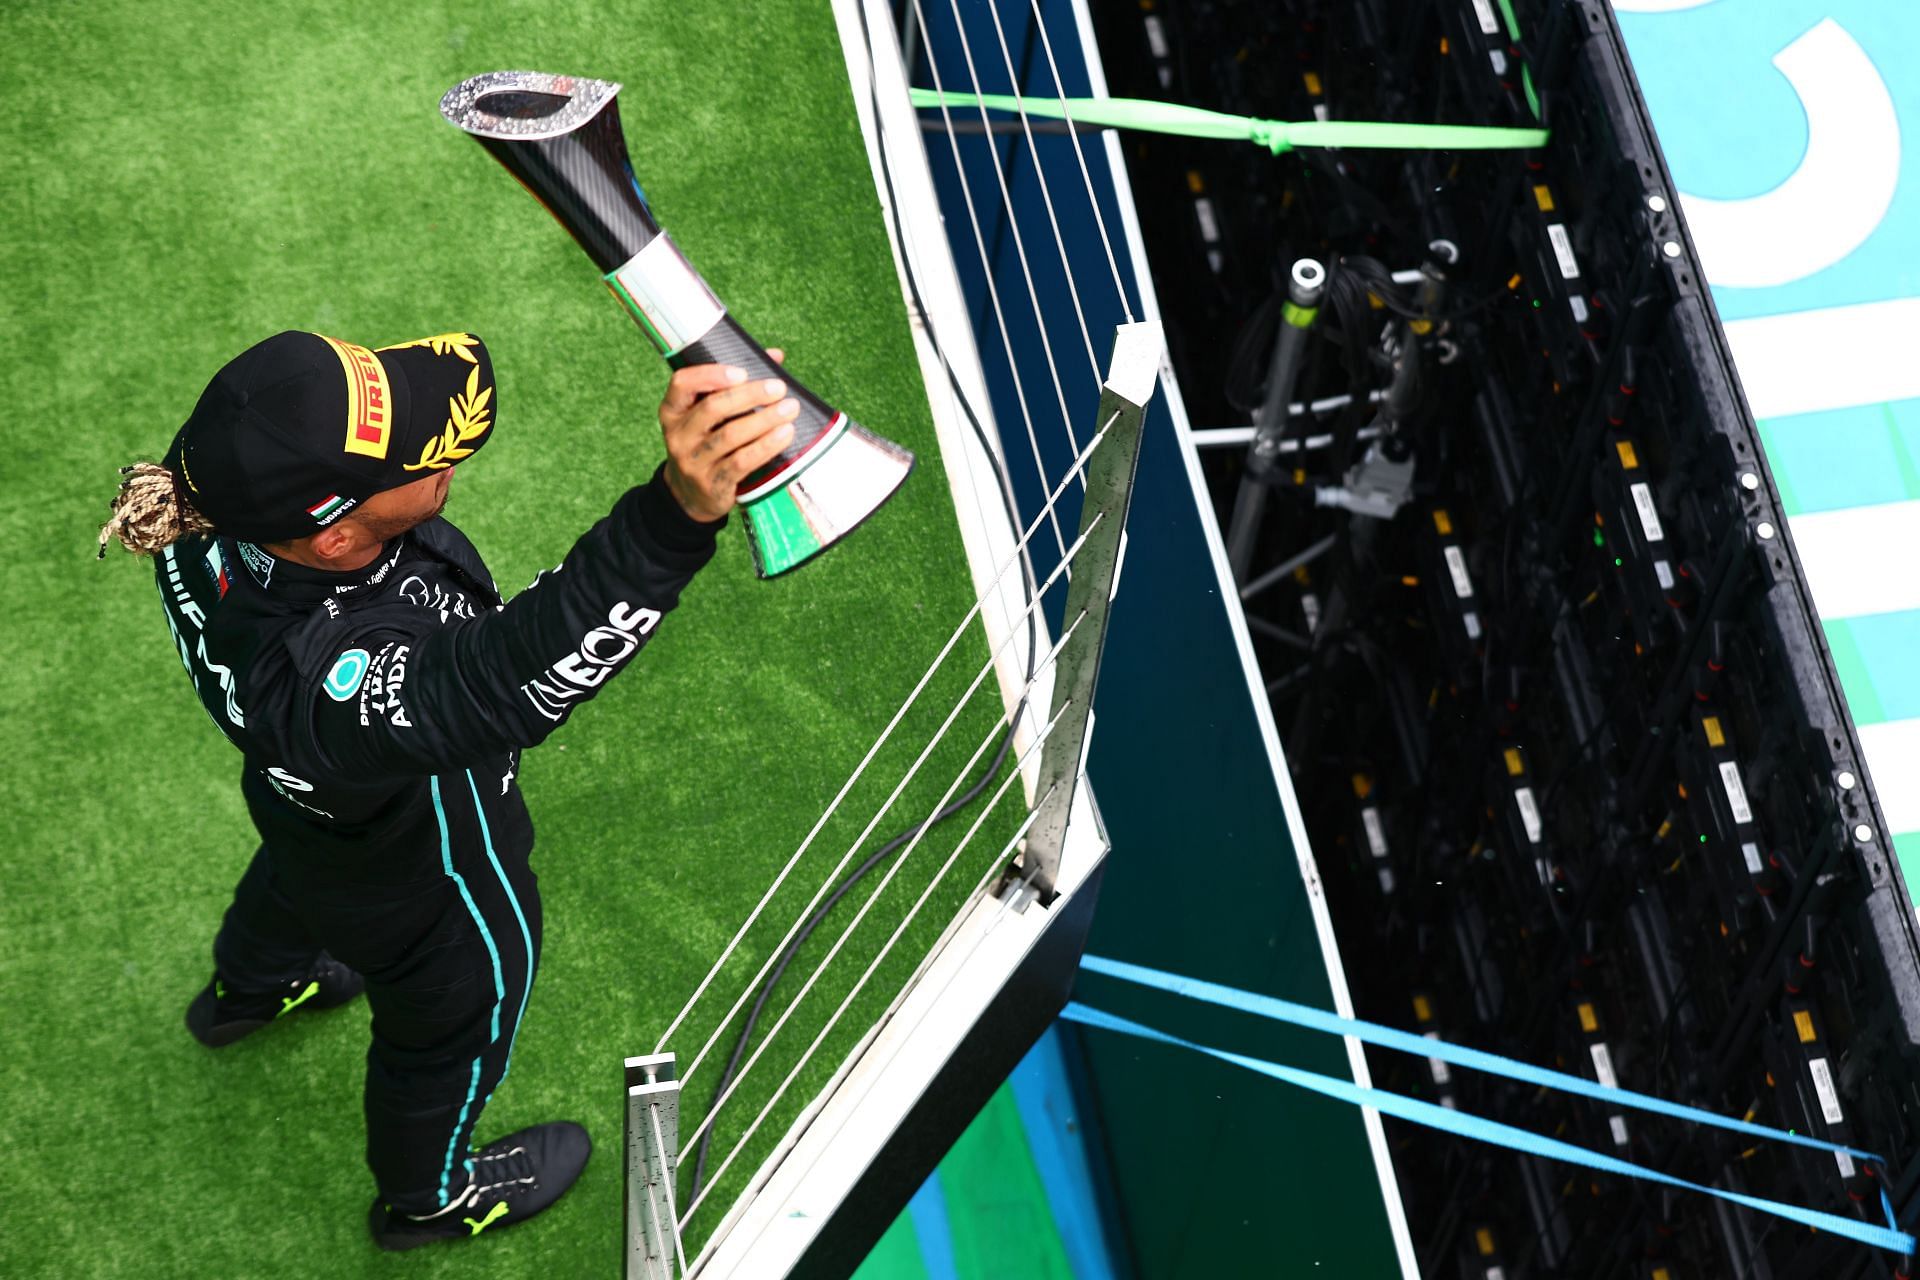 Mercedes driver Lewis hamilton holds aloft his P2 trophy on the podium at the 2022 F1 Hungarian GP. (Photo by Mark Thompson/Getty Images)